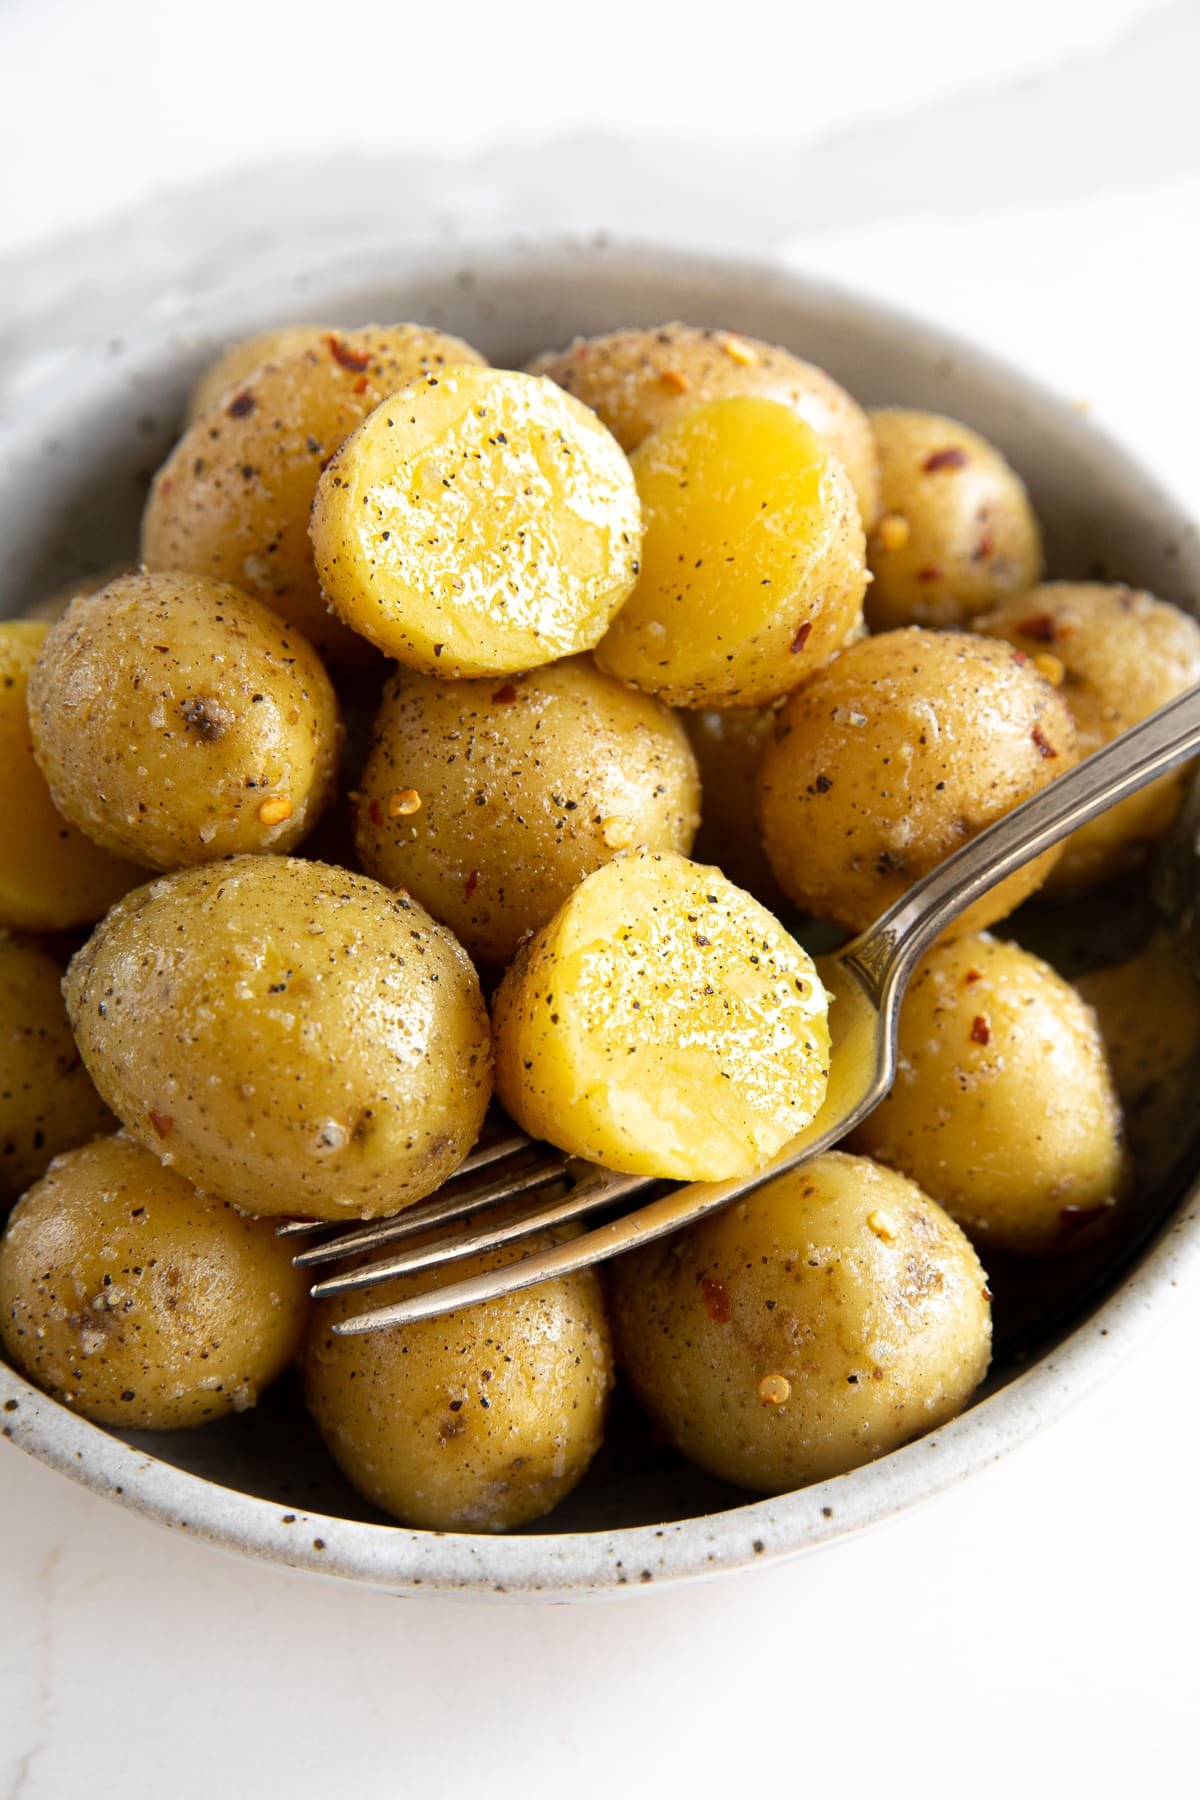 Round serving bowl filled with small yellow boiled potatoes coated in garlic and butter.